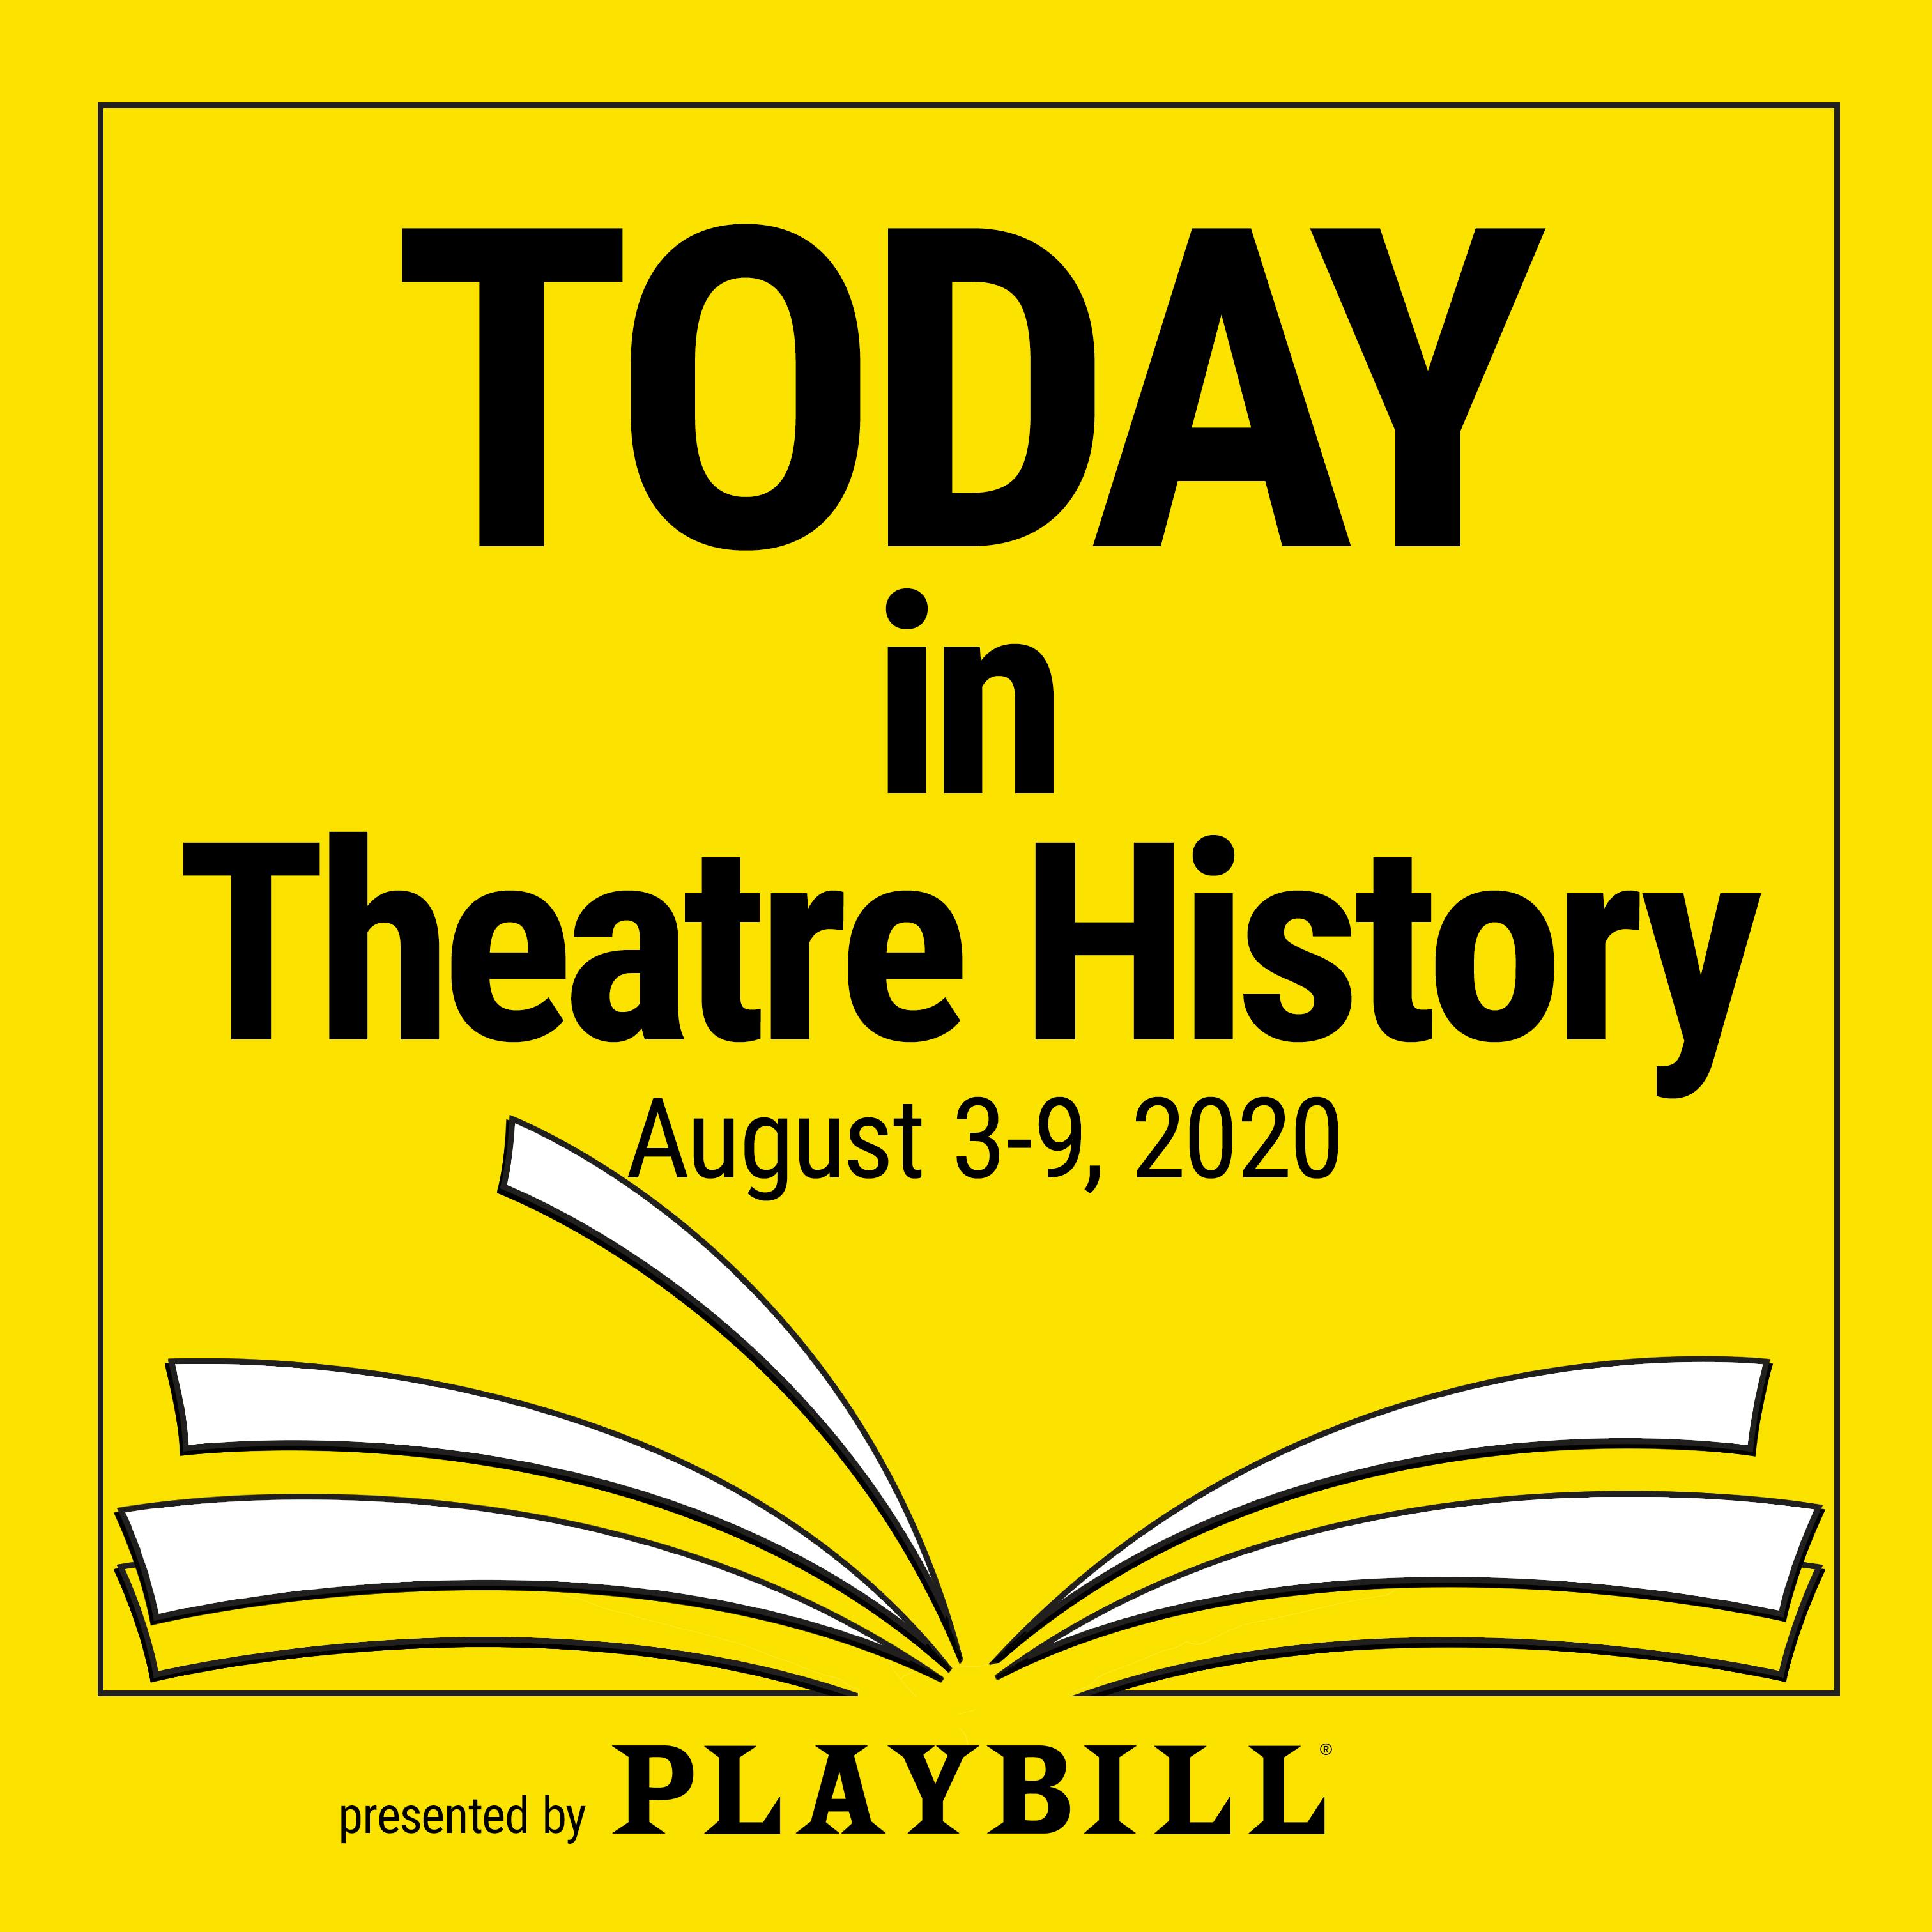 August 3–9, 2020: Liza to the rescue, Hamilton settles in to the Richard Rodgers, and more in theatre history this week!